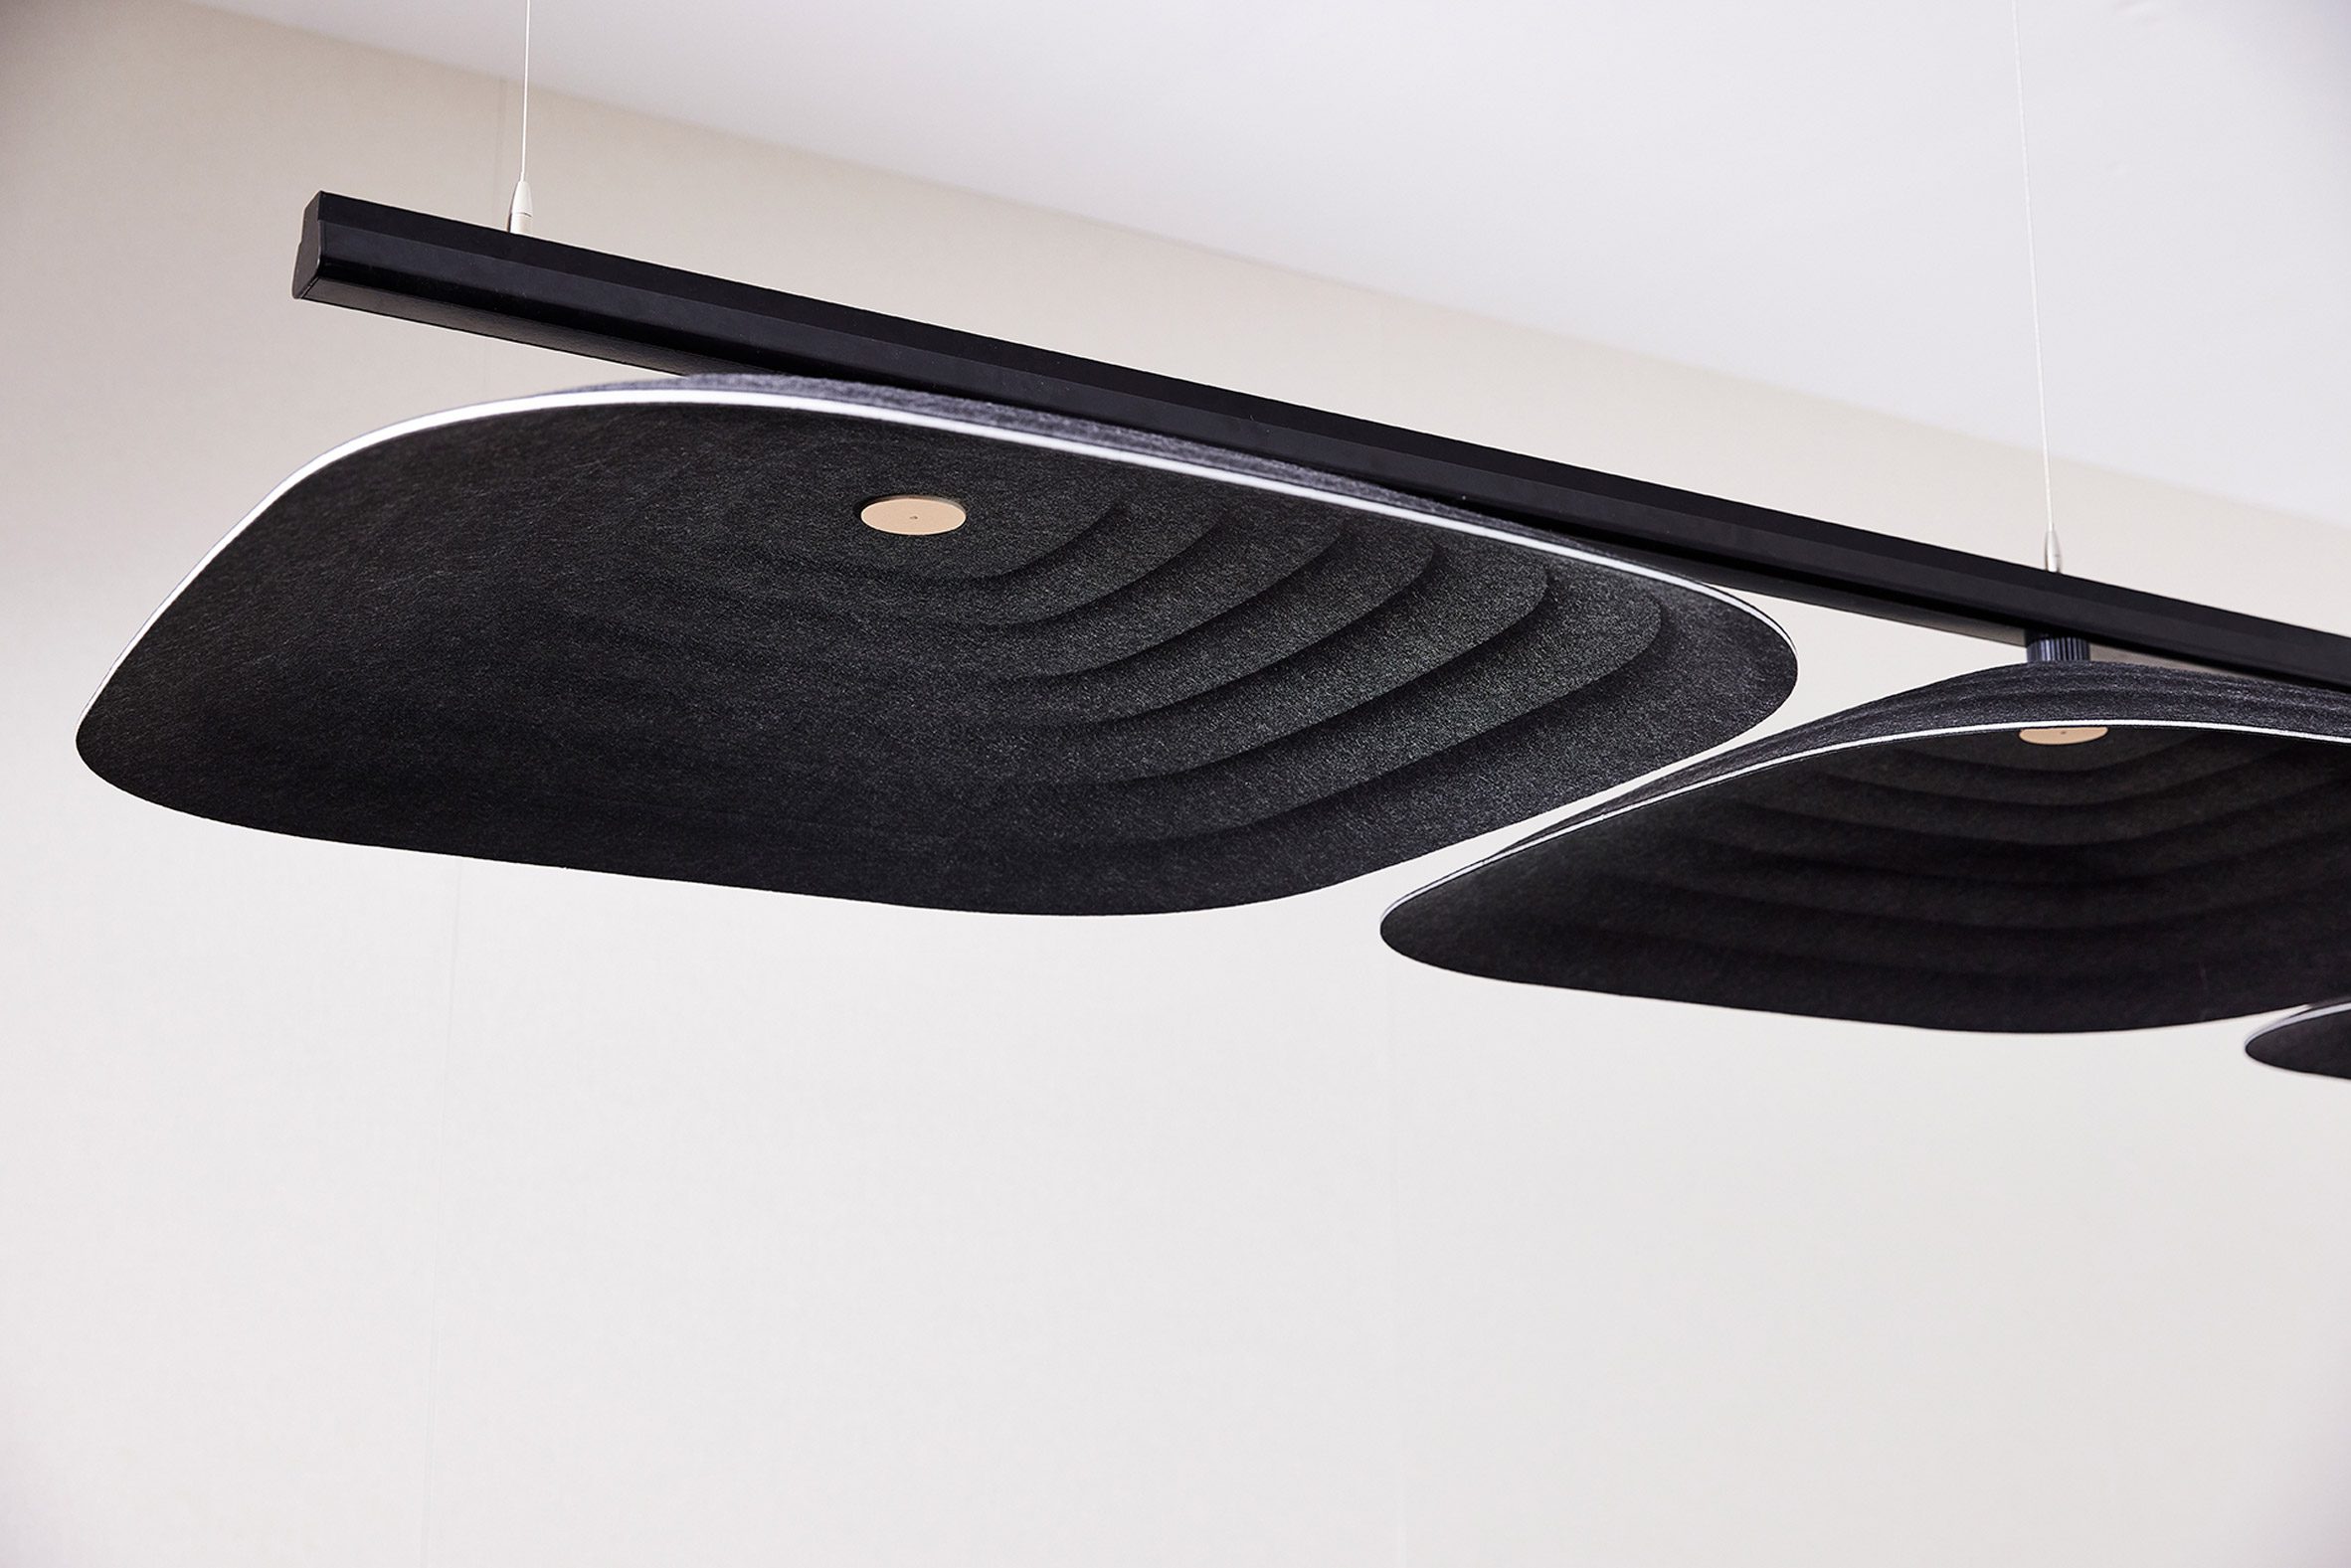 Fuji acoustic ceiling tiles by Woven Image